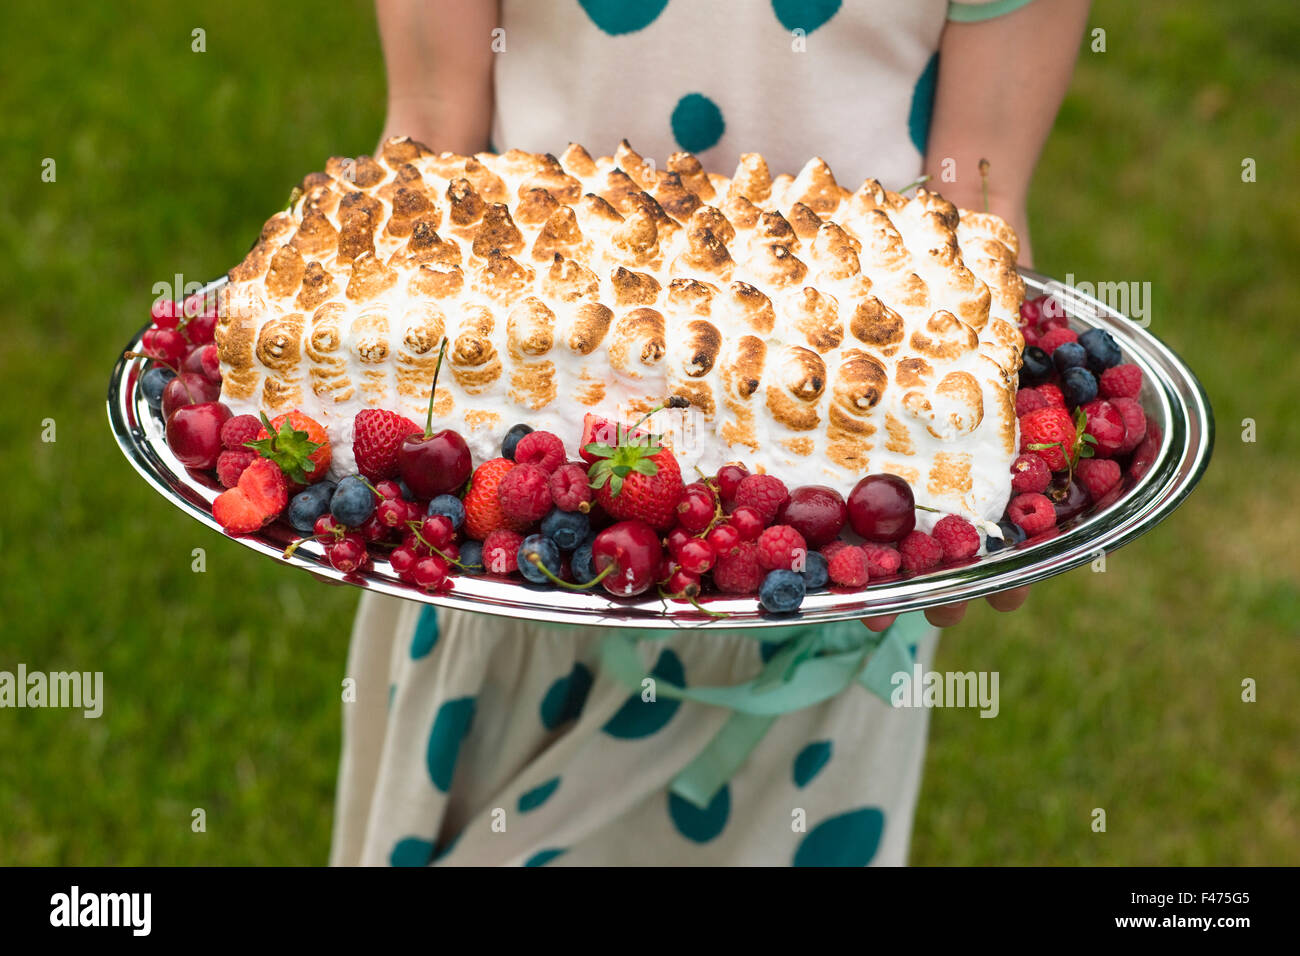 Portrait of a girl holding a cake in the summer, Sweden. Stock Photo